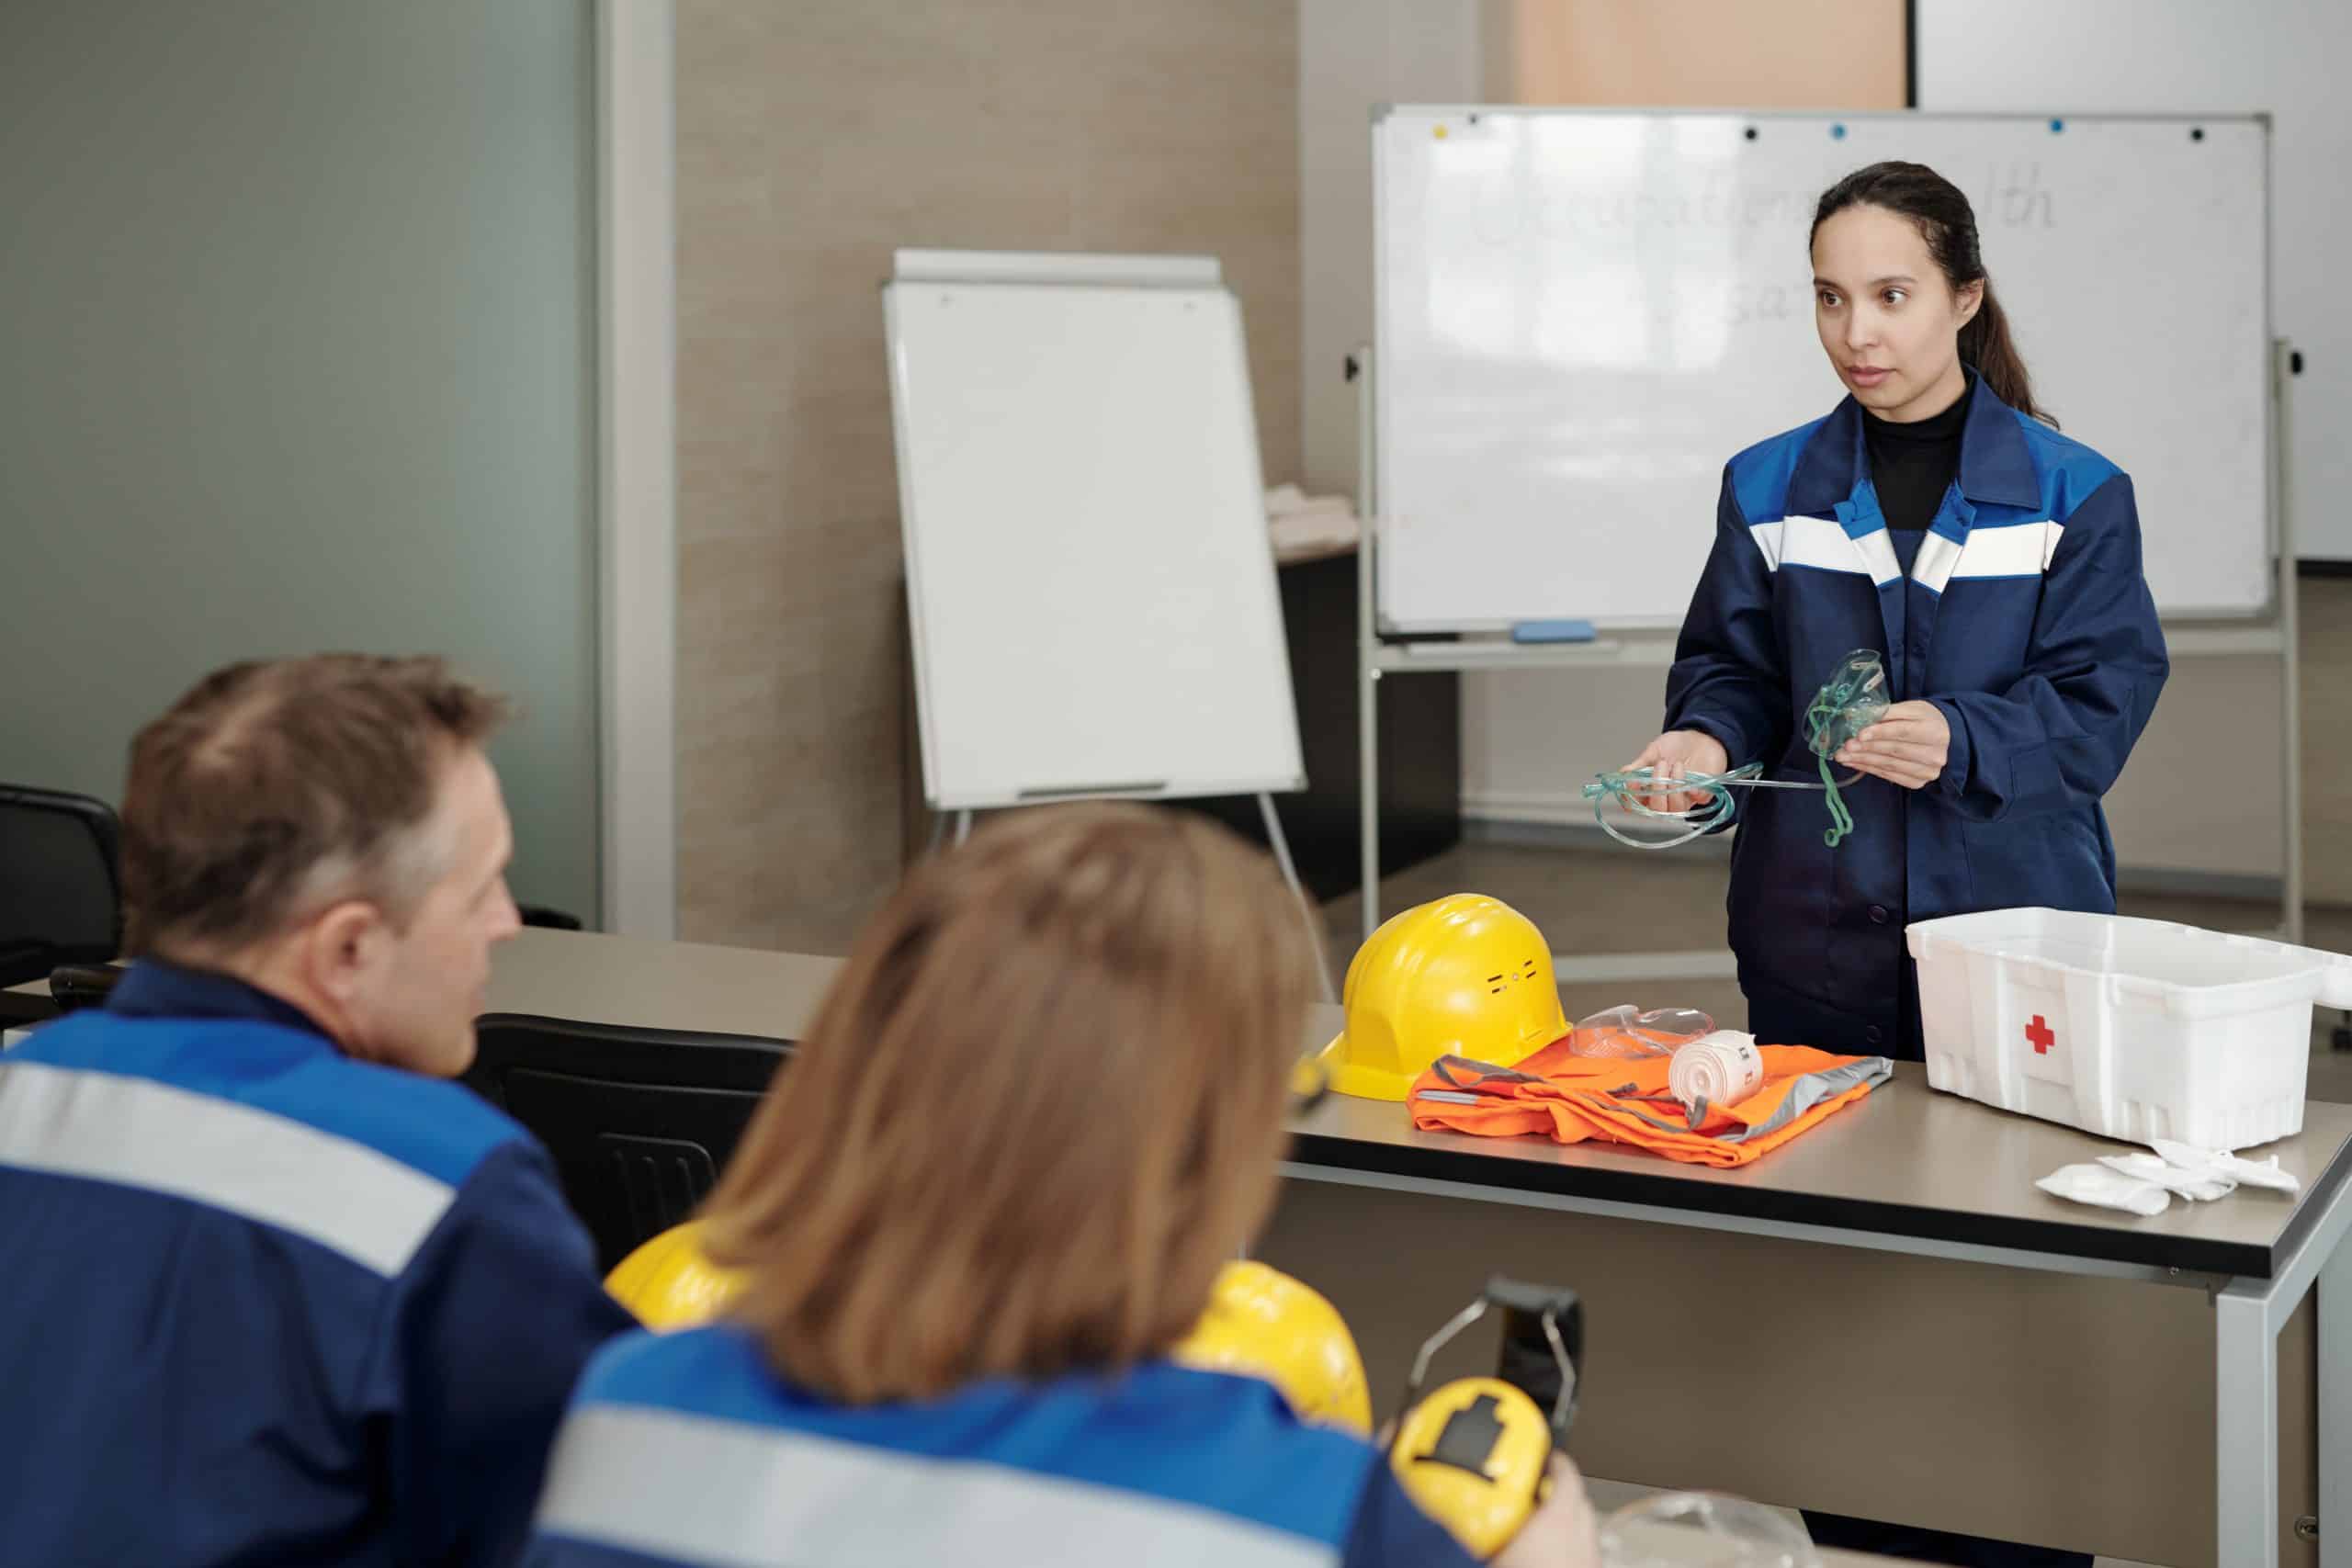 Female occupational safety instructor in blue jacket standing at table and holding oxygen mask while explaining how to give first aid